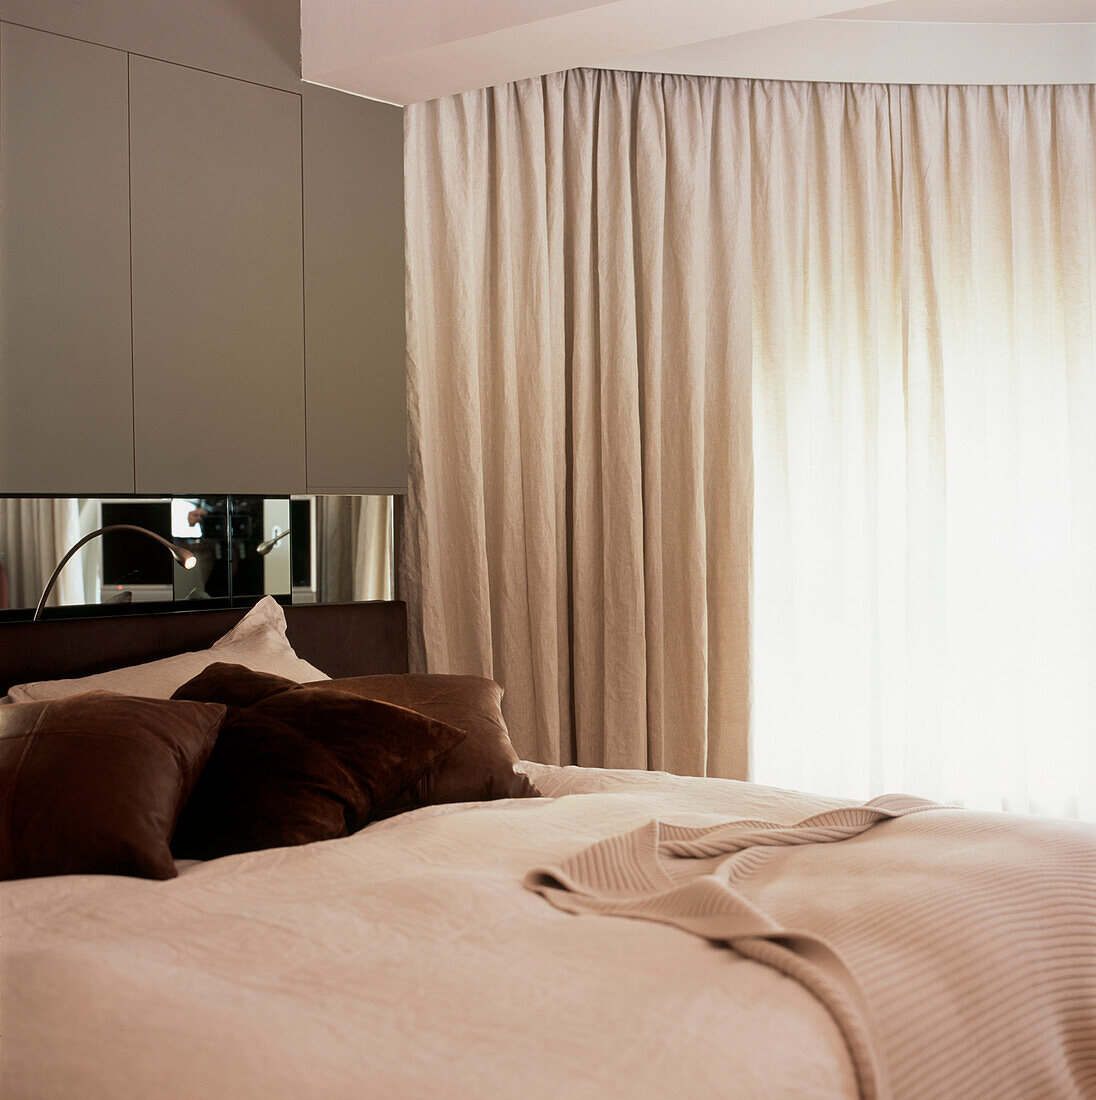 Bedroom detail with blanket cushions and mirror with full length linen curtains